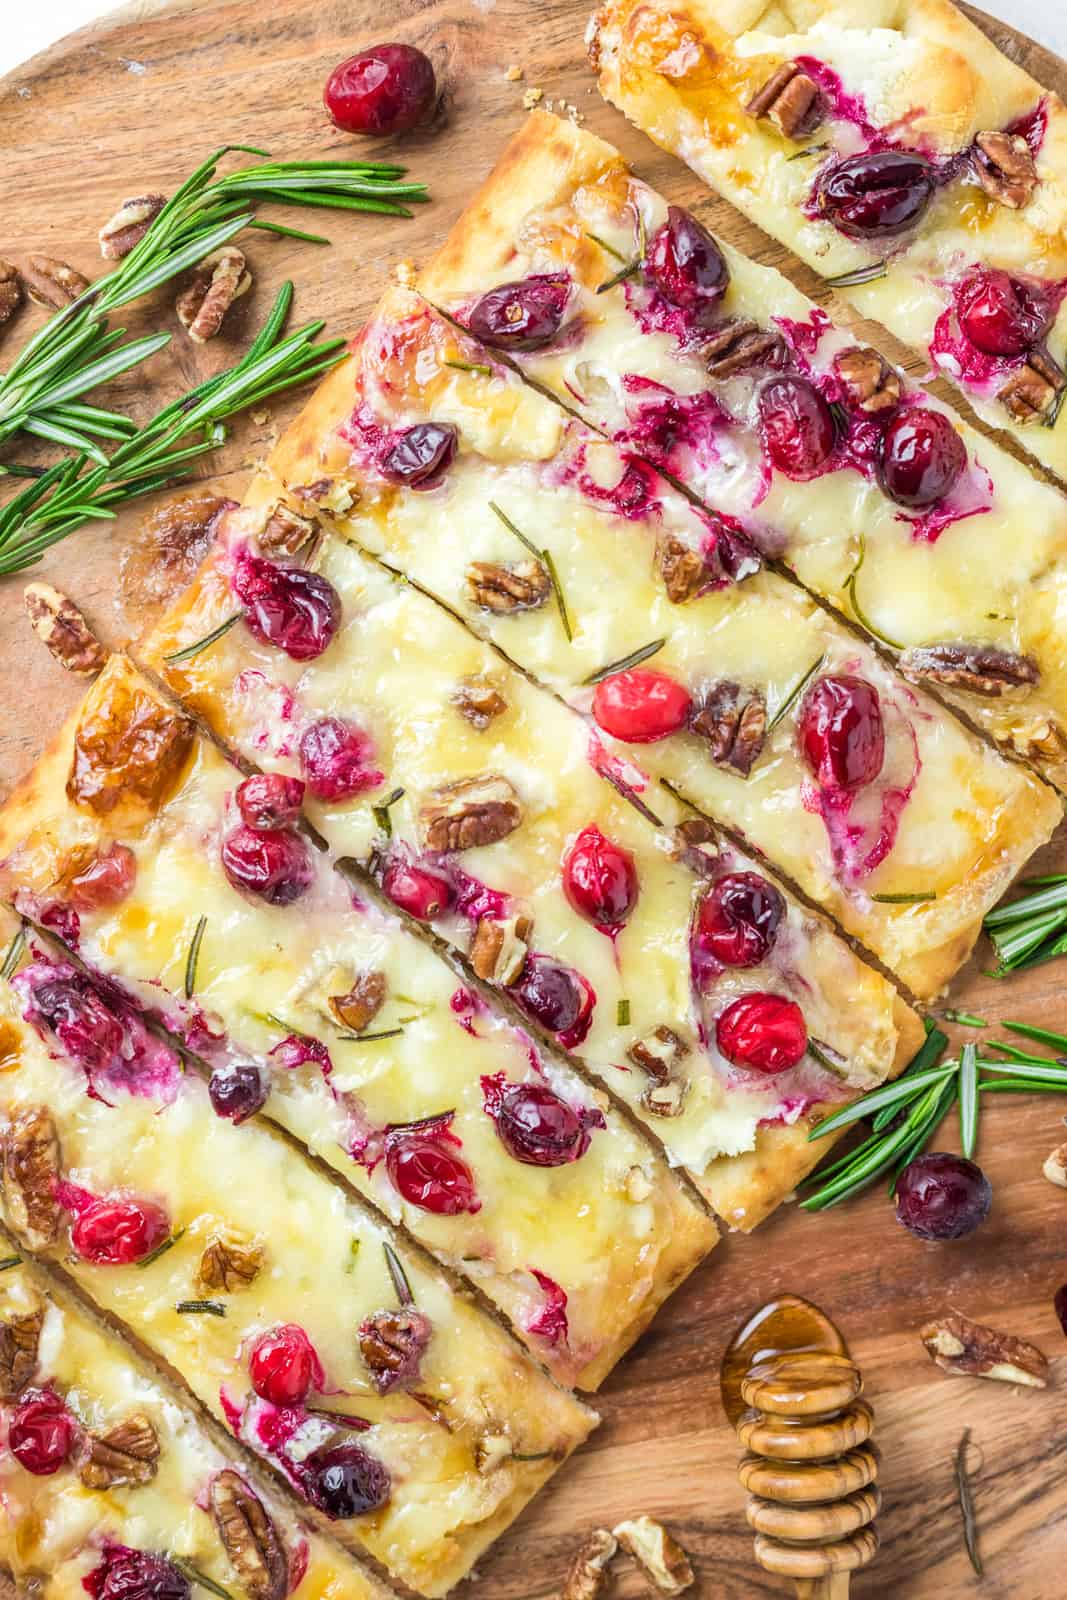 Cranberry Brie Flatbread cut into strips on wooden platter.